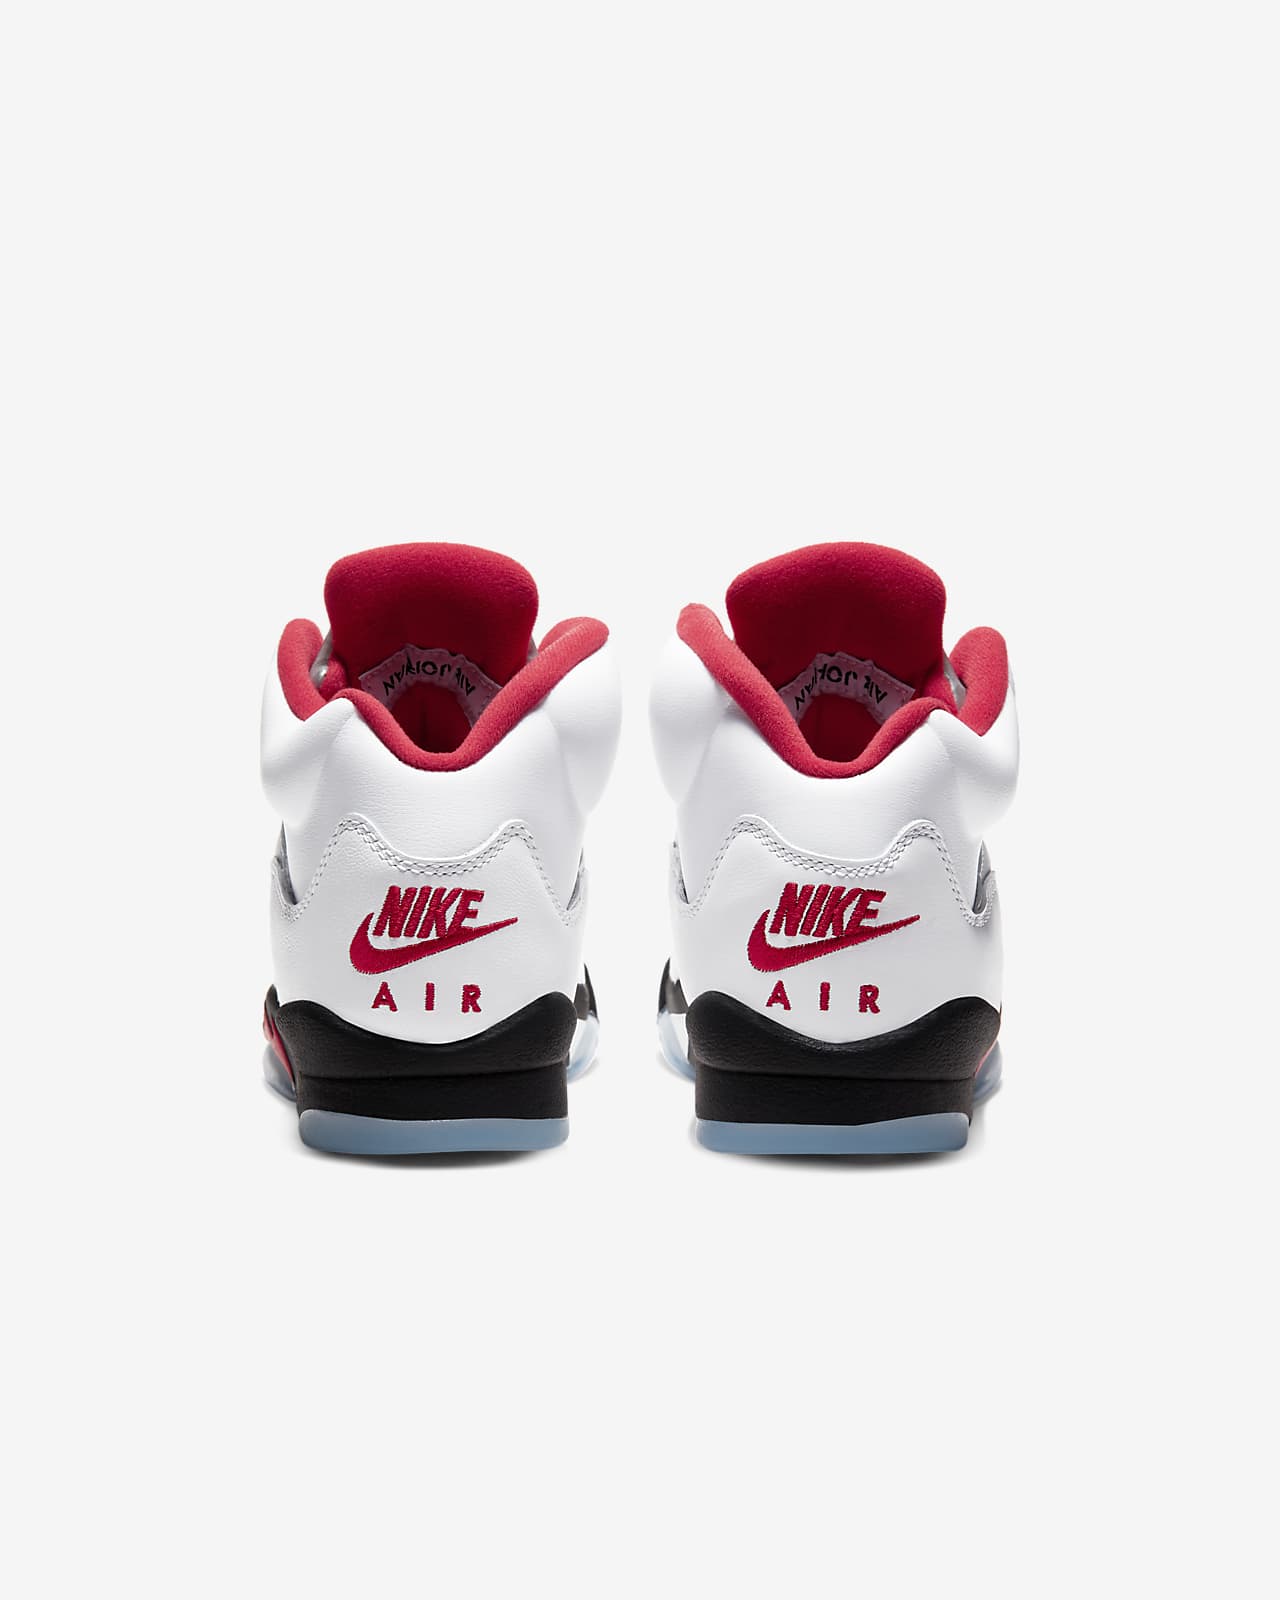 fire red 5s 2020 release date